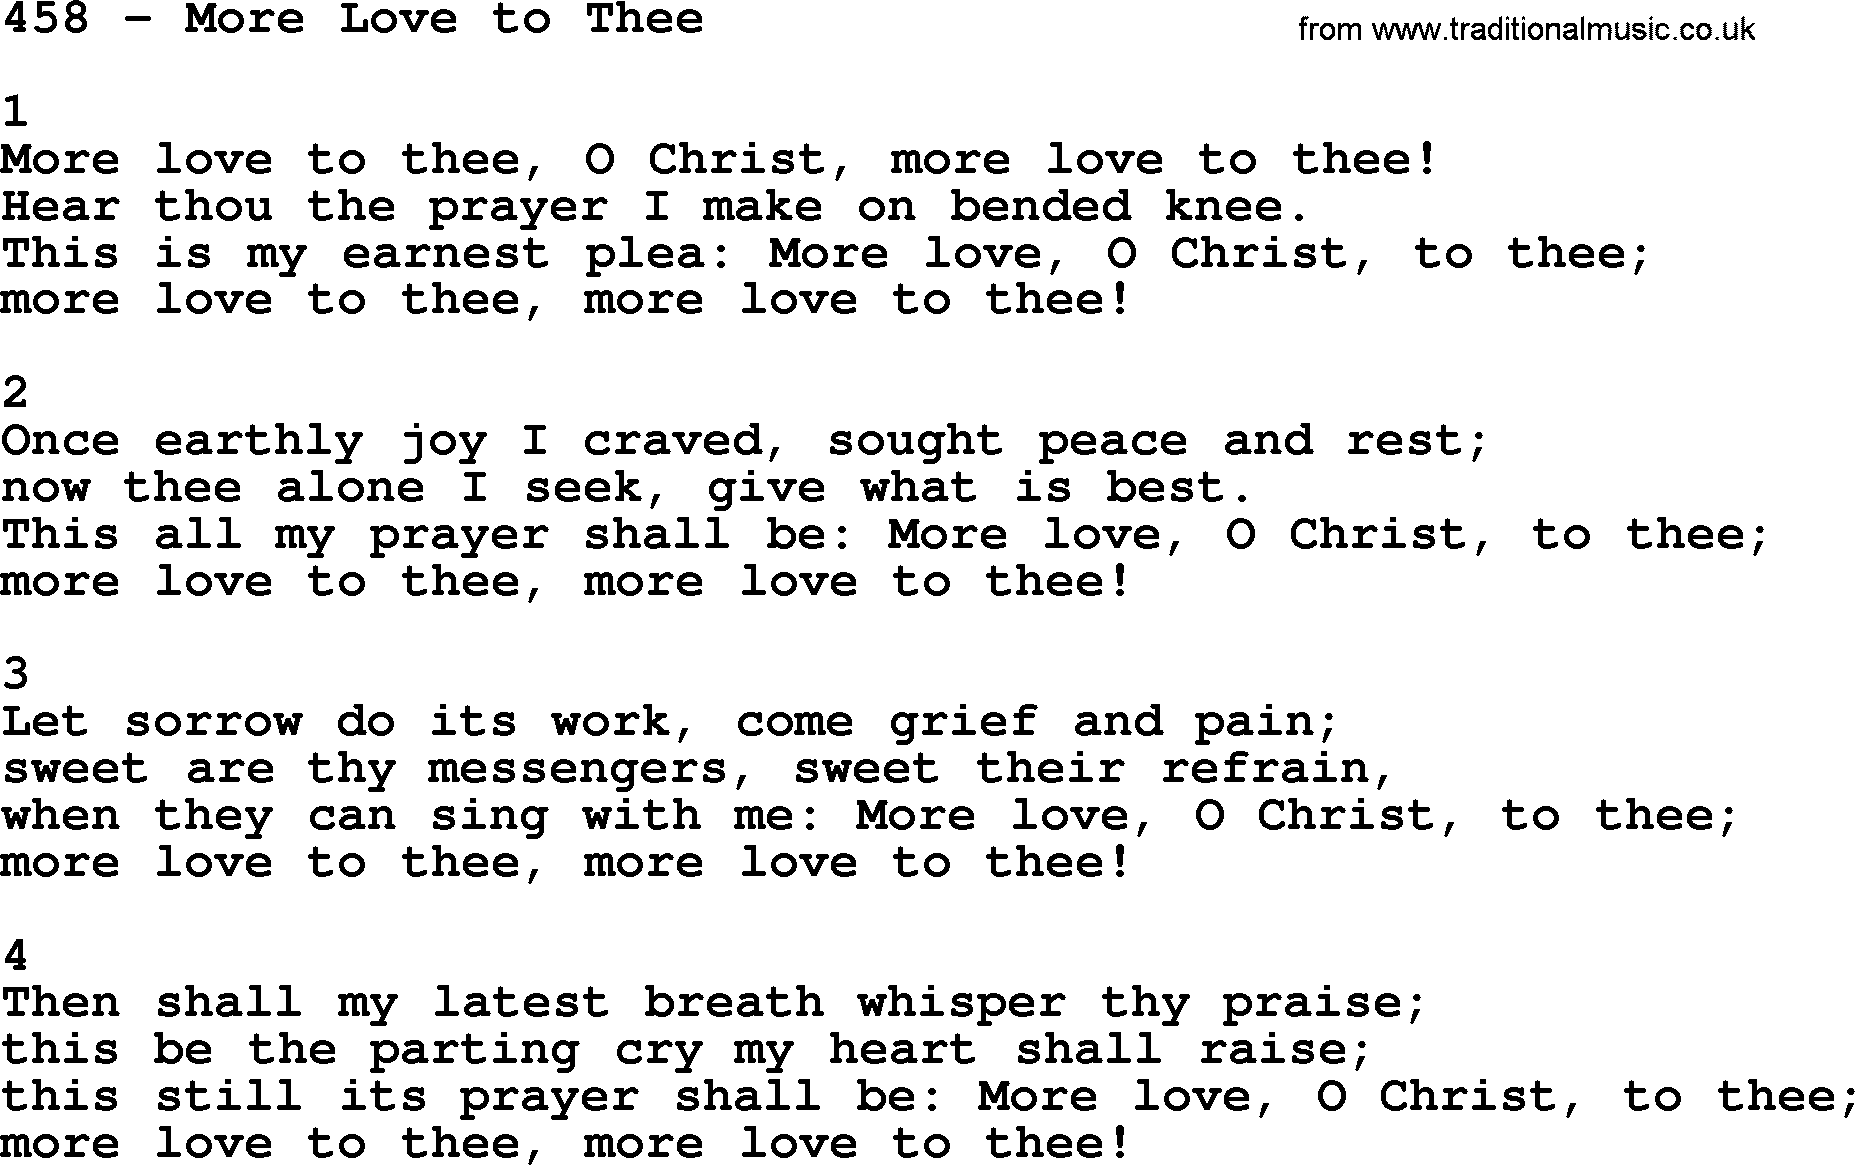 Complete Adventis Hymnal, title: 458-More Love To Thee, with lyrics, midi, mp3, powerpoints(PPT) and PDF,